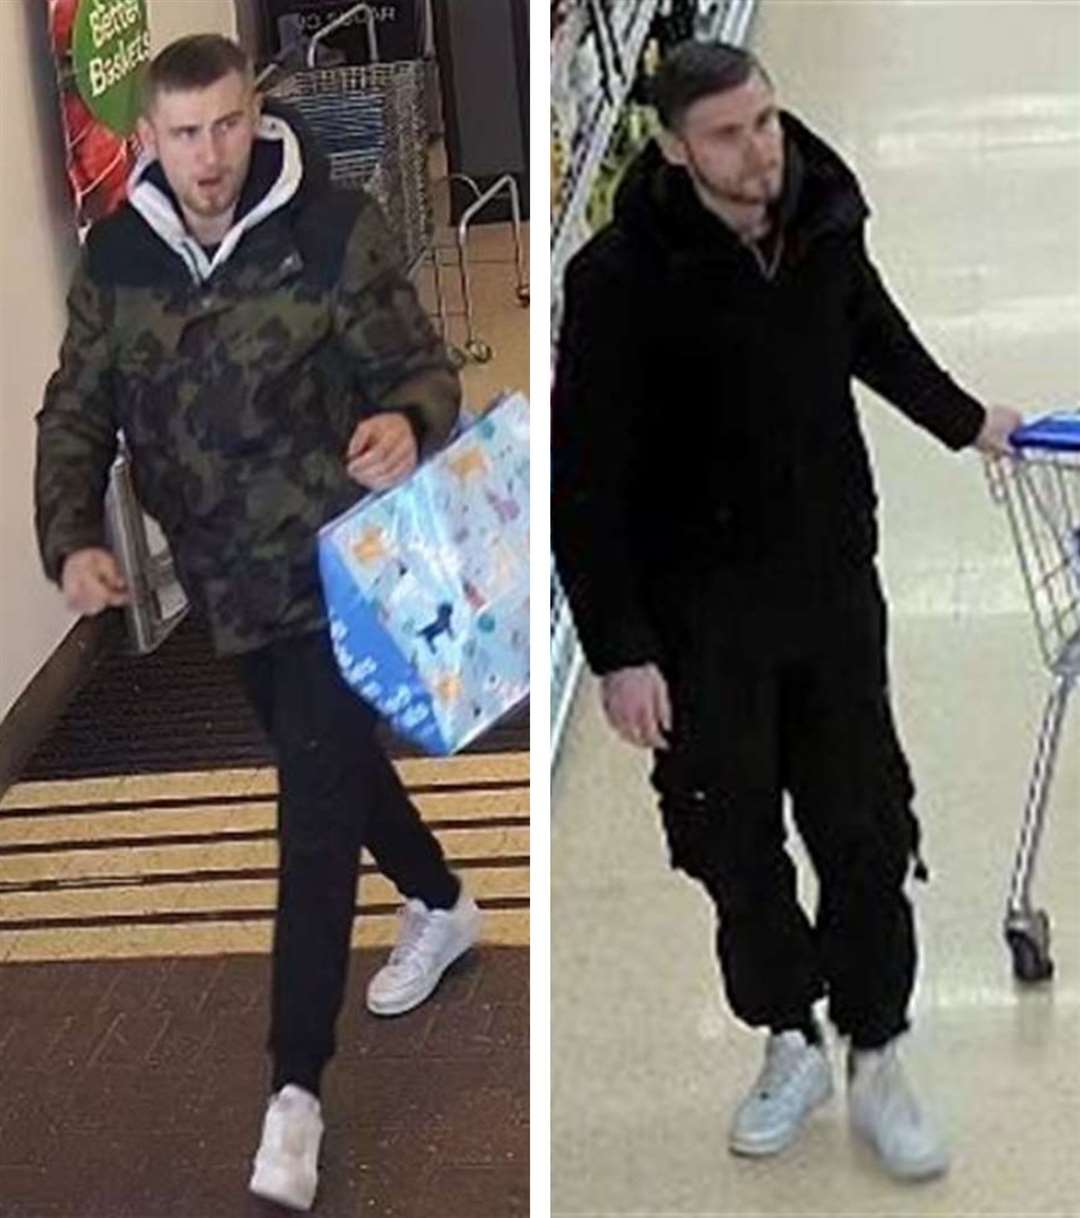 Police released this image after £2,000 of ink cartridges were stolen from Tesco in Sheerness. In July, a man was jailed for 20 weeks for the offence, police told KentOnline